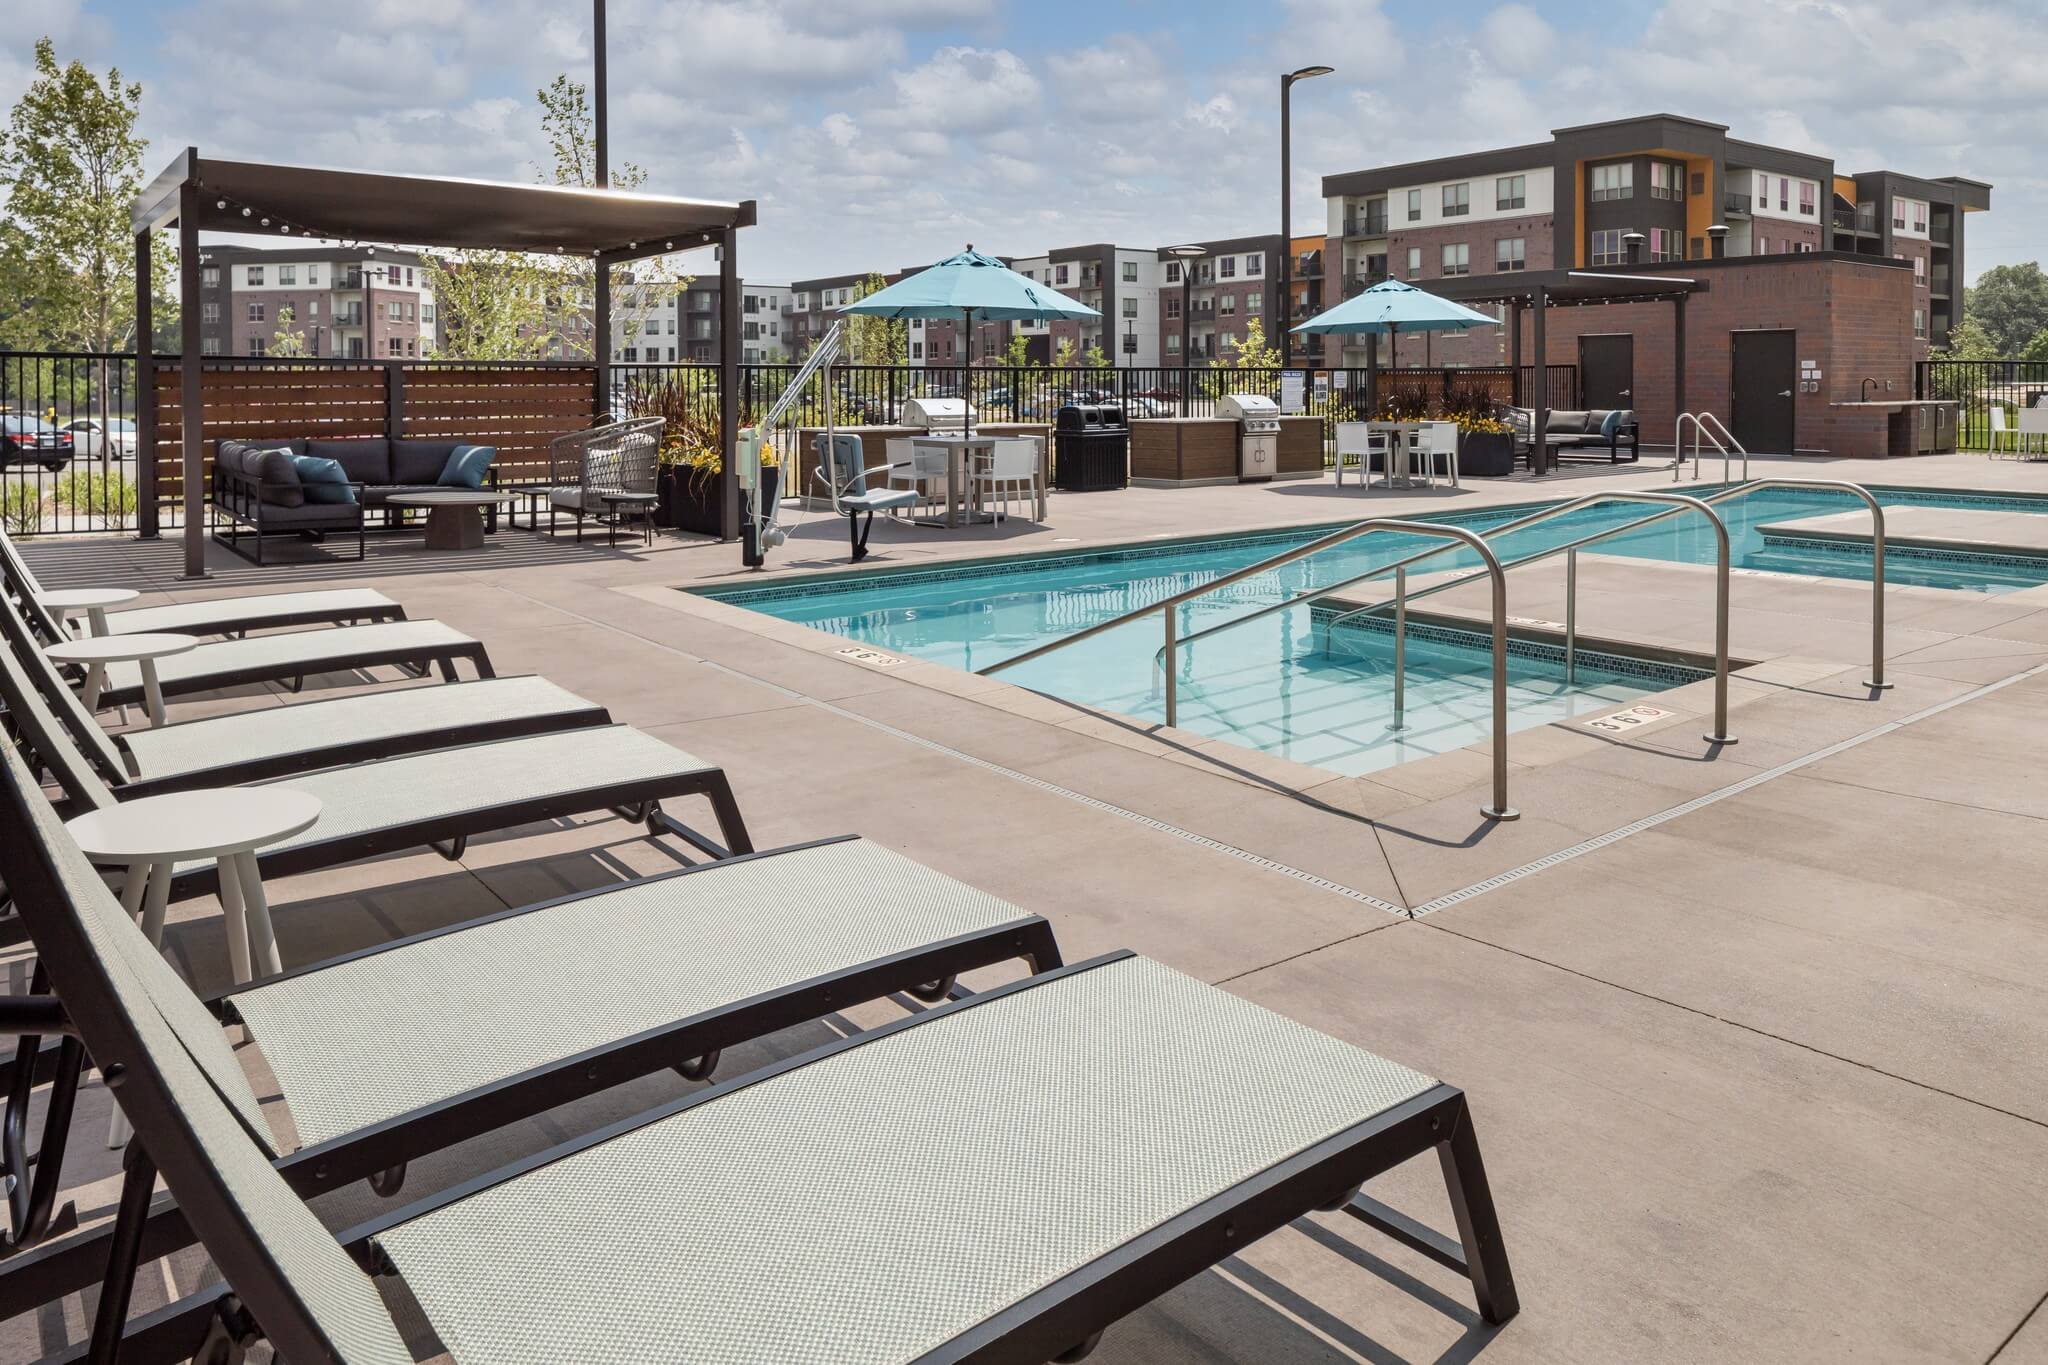 Aster at Riverdale Station pool showing lounge seating and umbrellas